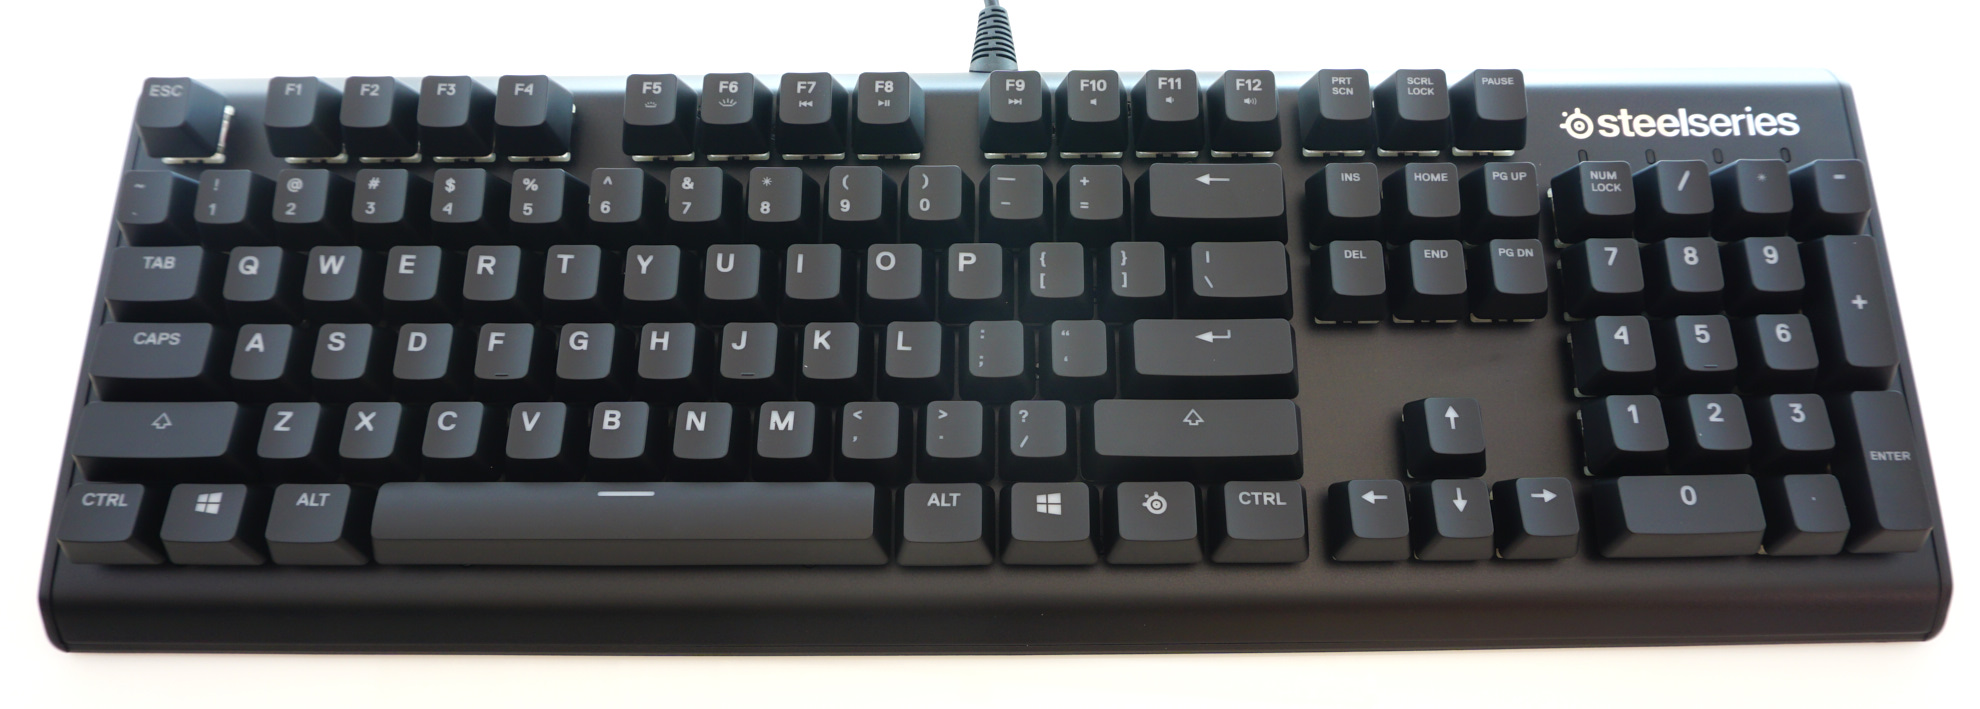 The Steelseries Apex M750 Mechanical Keyboard The Steelseries Apex M750 Mechanical Gaming Keyboard Review Set Apart By Software